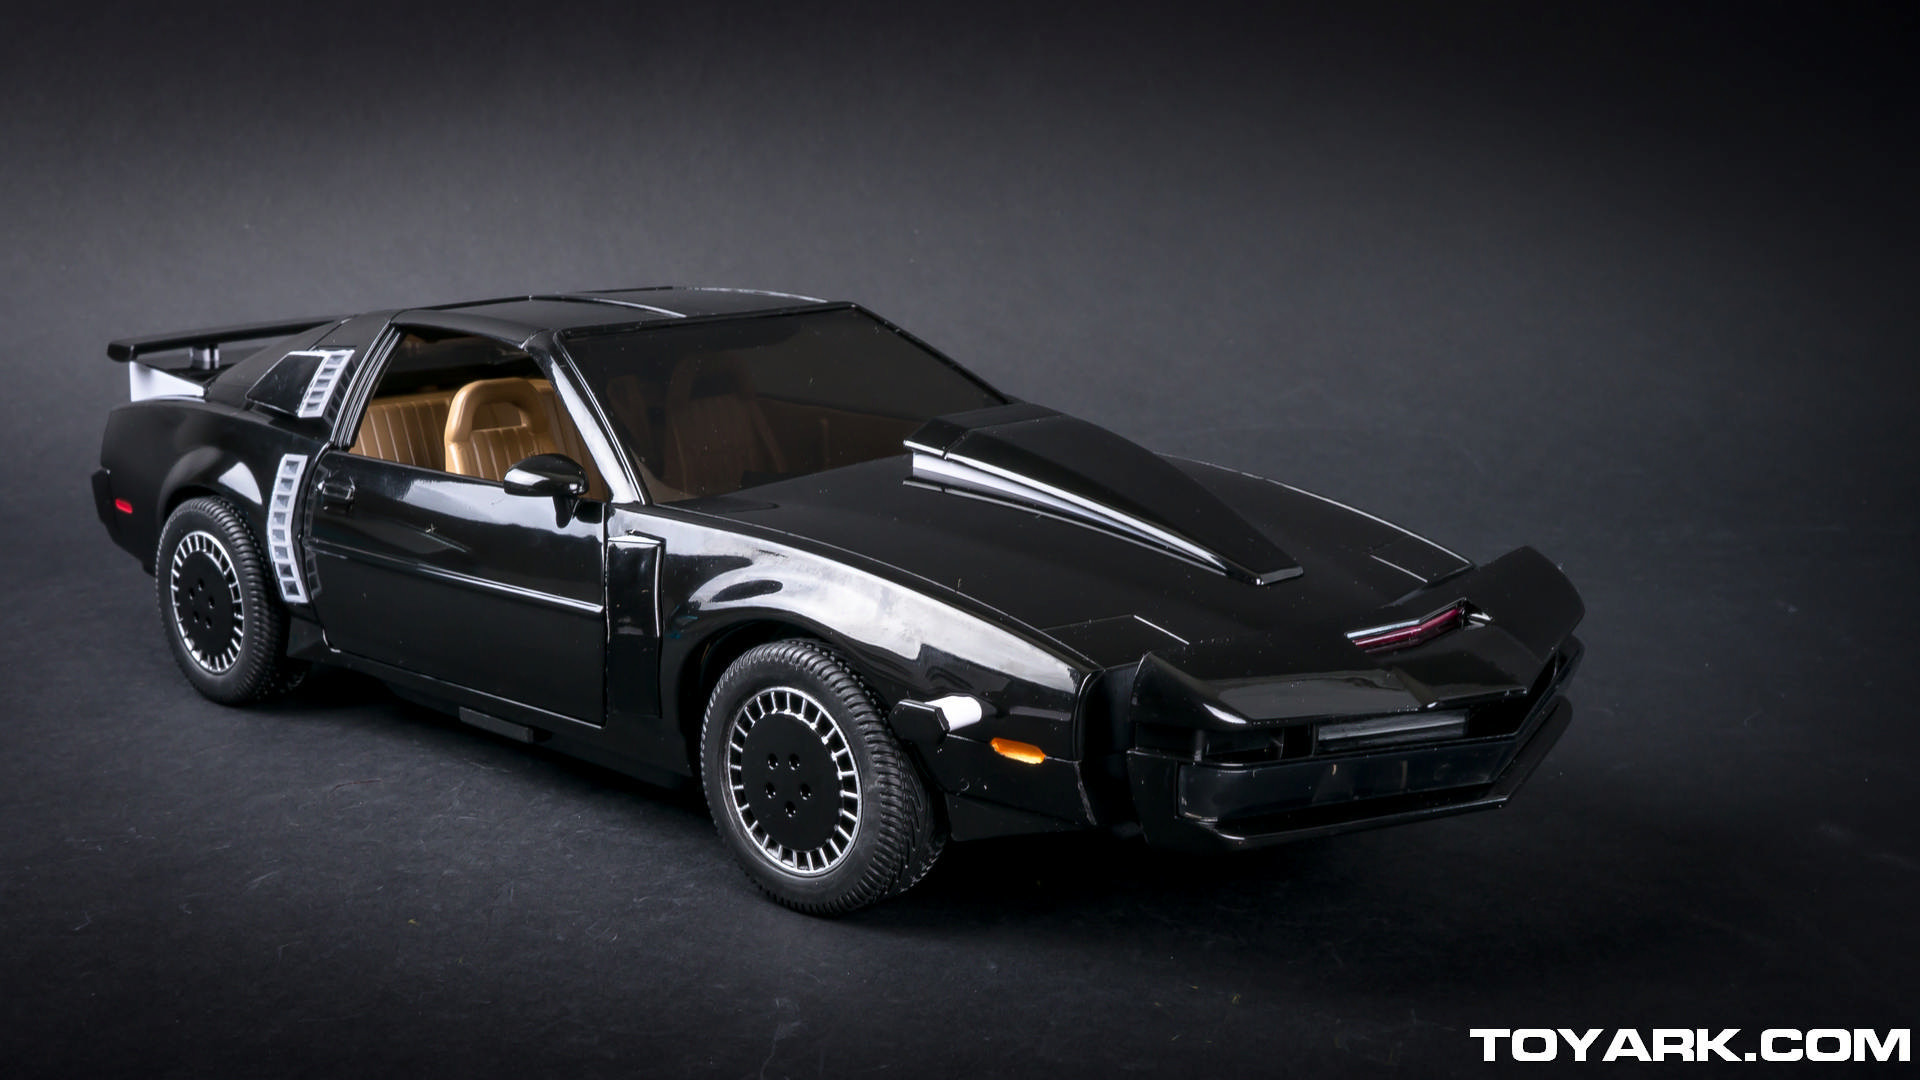 1920x1080 Related Pictures knight rider wallpapers knight rider kitt wallpa...